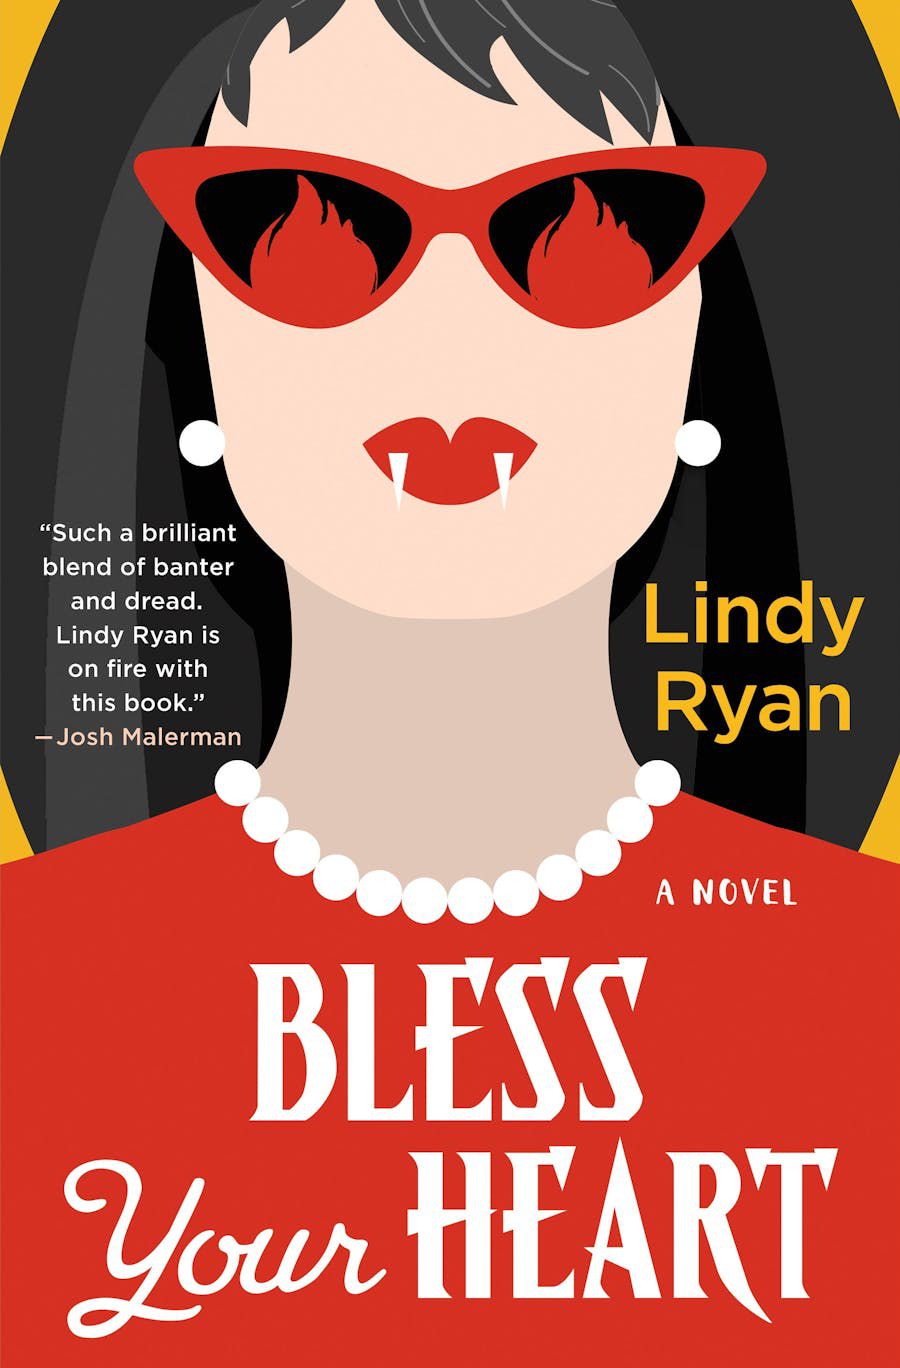 The Bless Your Heart book cover shows an illustration of a woman with fangs sticking out of her mouth.